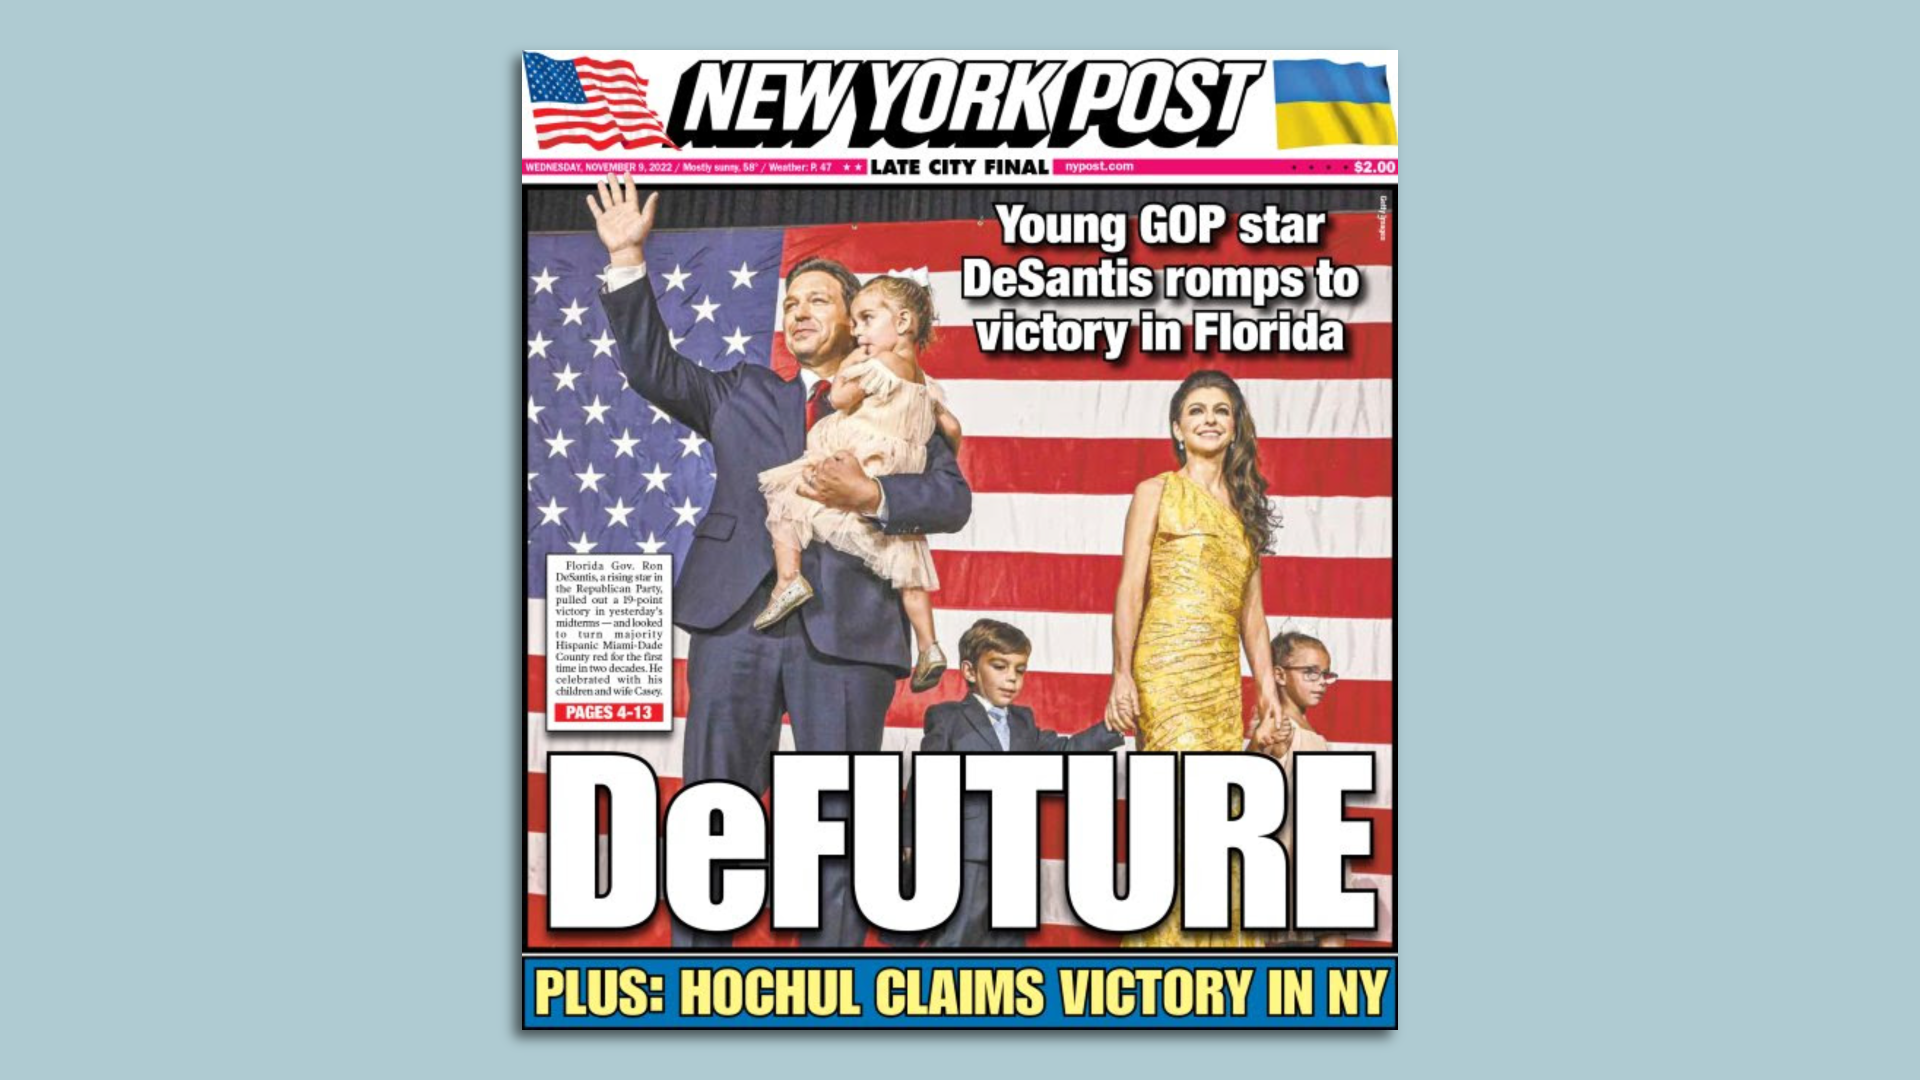 The cover of the New York Post that reads: "DeFuture."